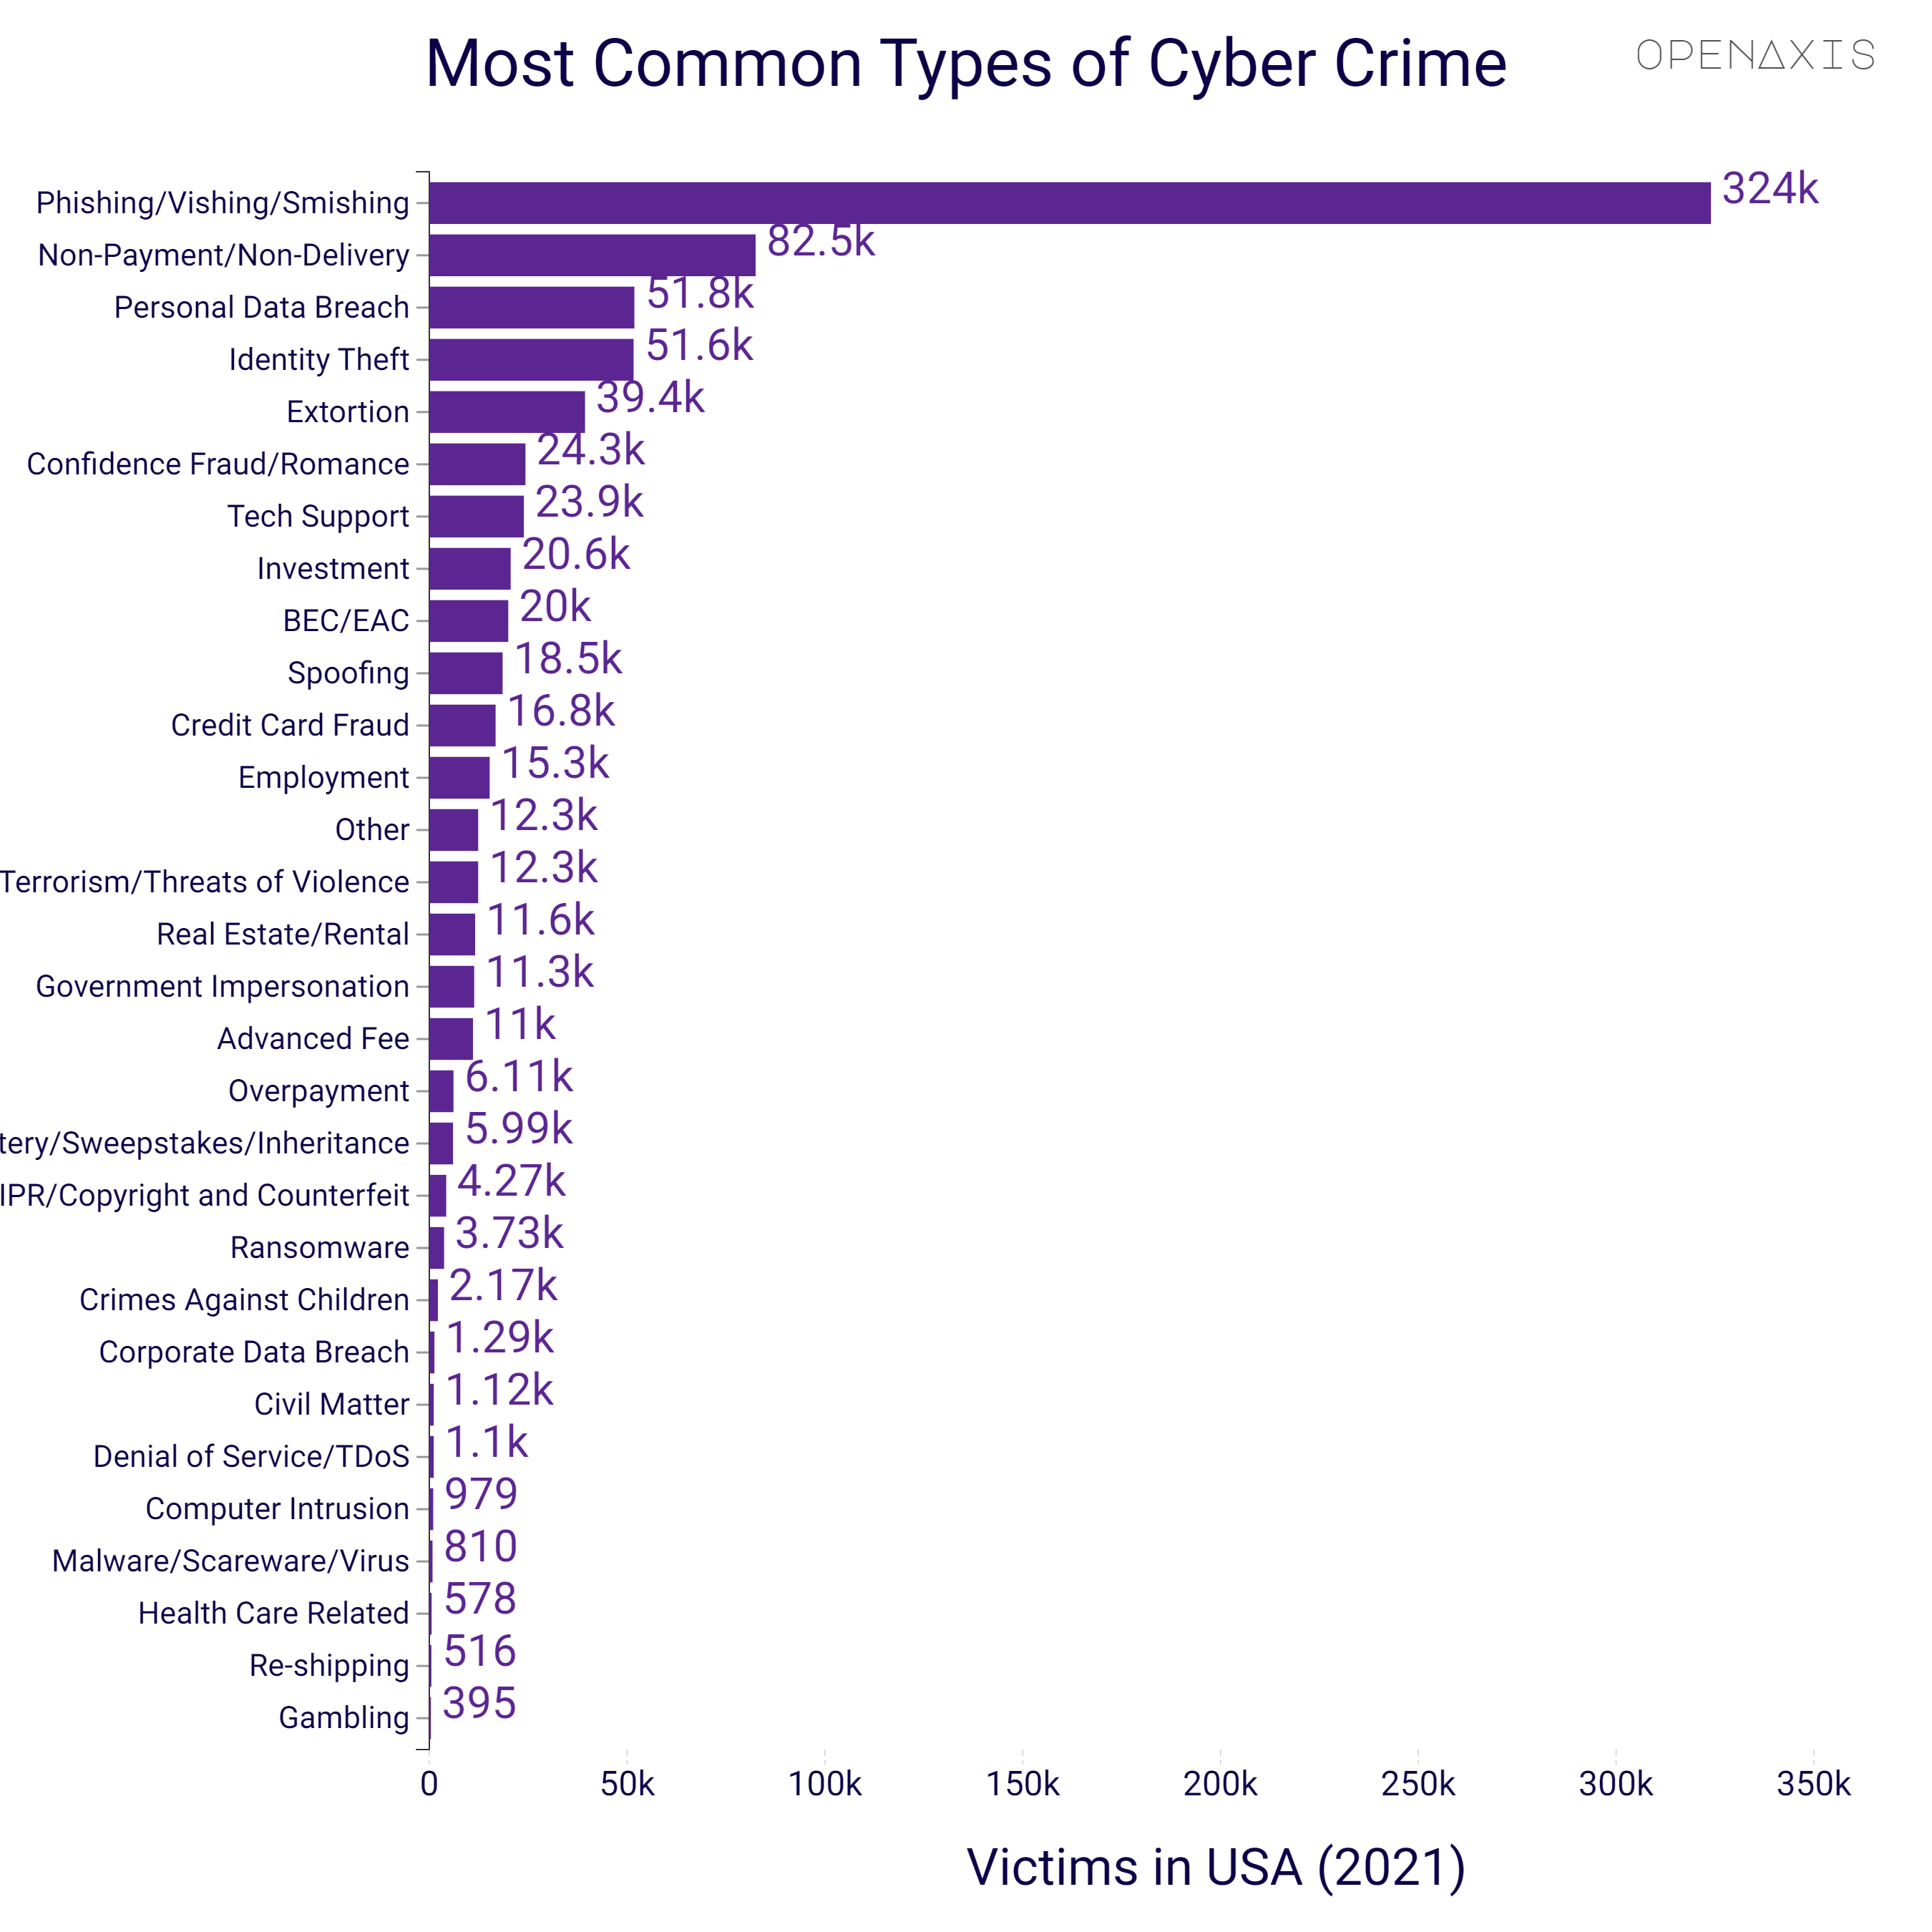 <p>The dataset lists the number of Americans fell victim to various types of internet crime in 2021, phishing/vishing/smishing attacks by far the most common.</p><p><br /></p><p><span data-index="0" data-denotation-char data-id="0" data-value="&lt;a href=&quot;/search?q=%23cyber&quot; target=_self&gt;#cyber" data-link="/search?q=%23cyber">﻿<span contenteditable="false"><span></span><a href="/search?q=%23cyber" target="_self">#cyber</a></span>﻿</span> <span data-index="0" data-denotation-char data-id="0" data-value="&lt;a href=&quot;/search?q=%23cybercrime&quot; target=_self&gt;#cybercrime" data-link="/search?q=%23cybercrime">﻿<span contenteditable="false"><span></span><a href="/search?q=%23cybercrime" target="_self">#cybercrime</a></span>﻿</span></p><p><br /></p><p>Source: <a href="/data/3795" target="_blank">FBI</a></p><p><br /></p>